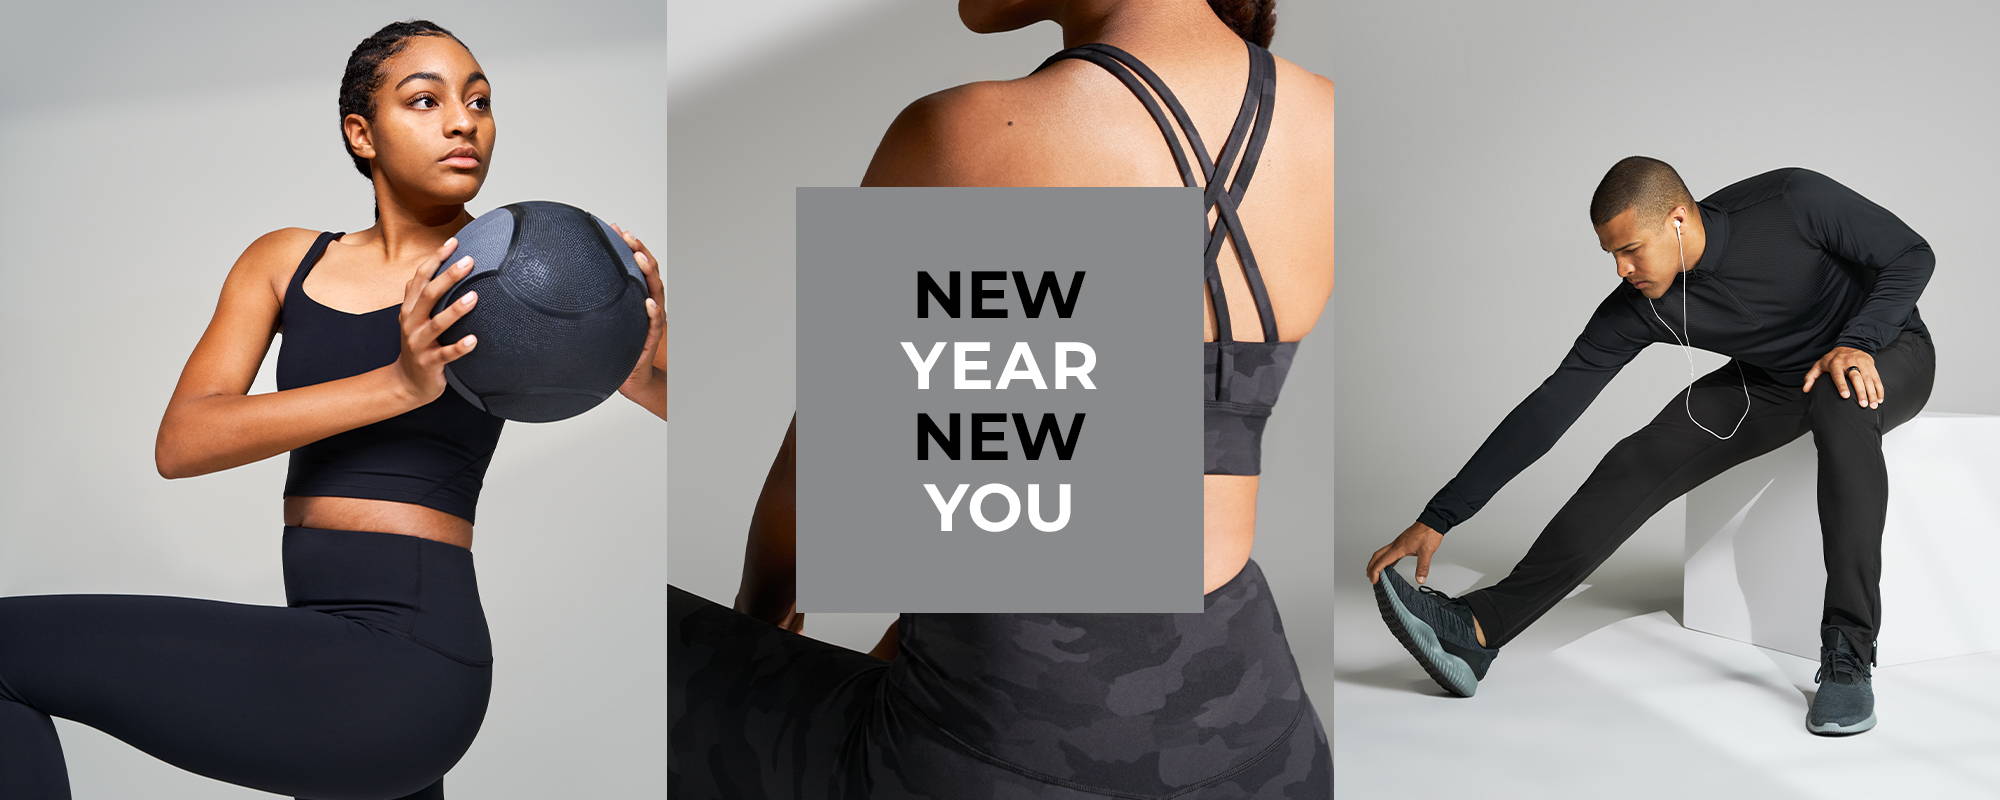 New Year New You. Tall woman and man wearing clothing from joyouslyvibrantlife's Balance and Performance collection. 